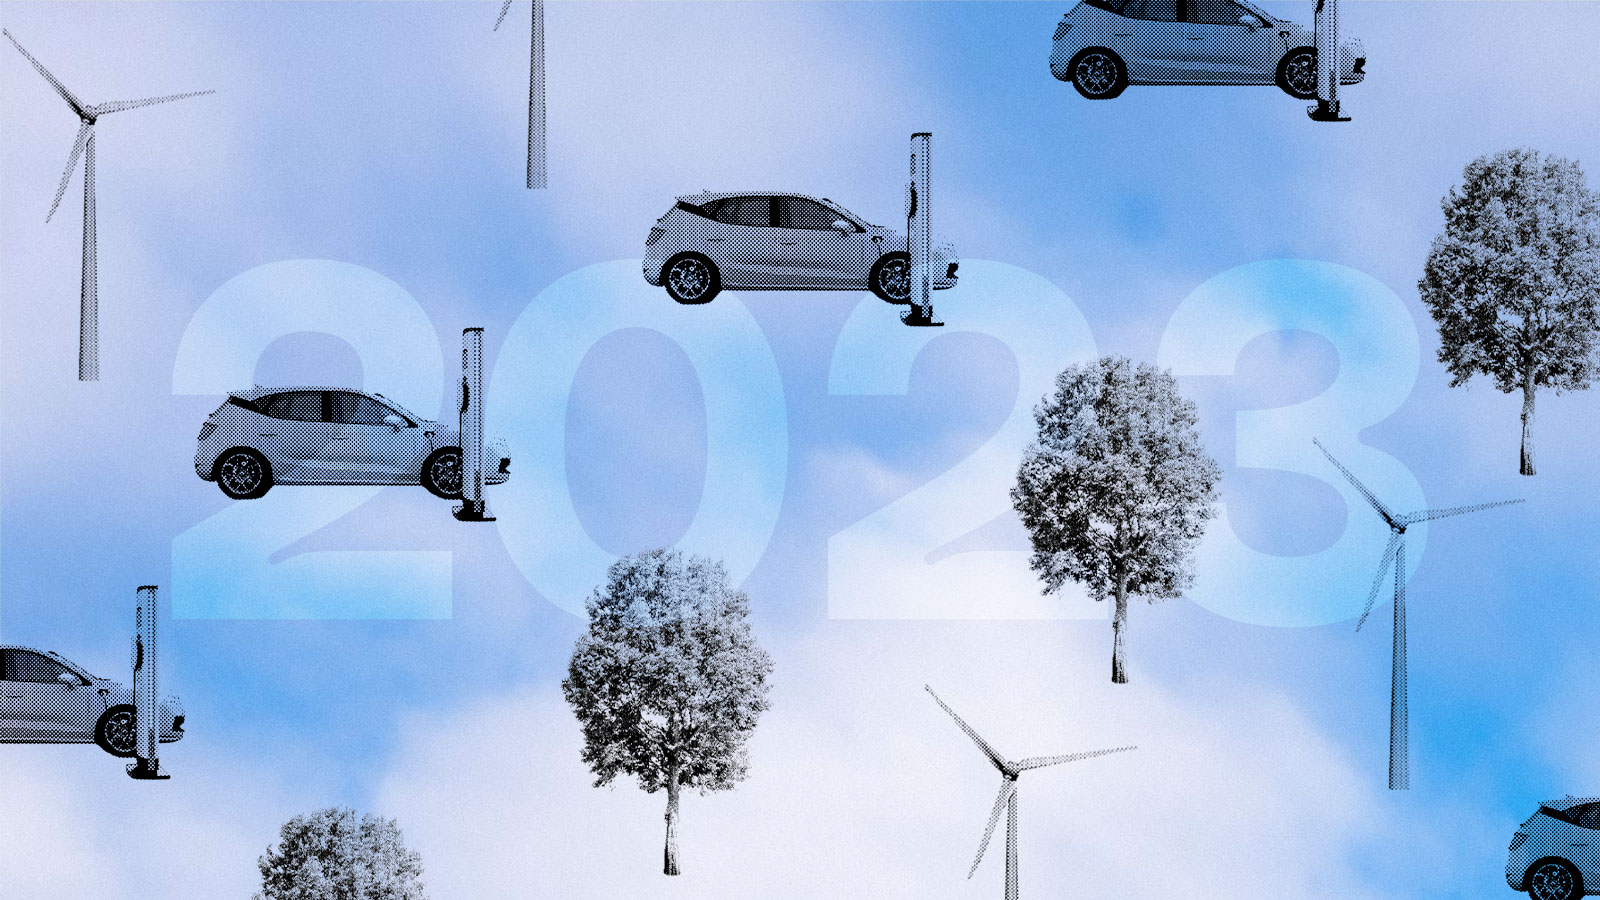 digital collage of halftone wind turbines, electric cars, and trees on a cloudy blue sky background